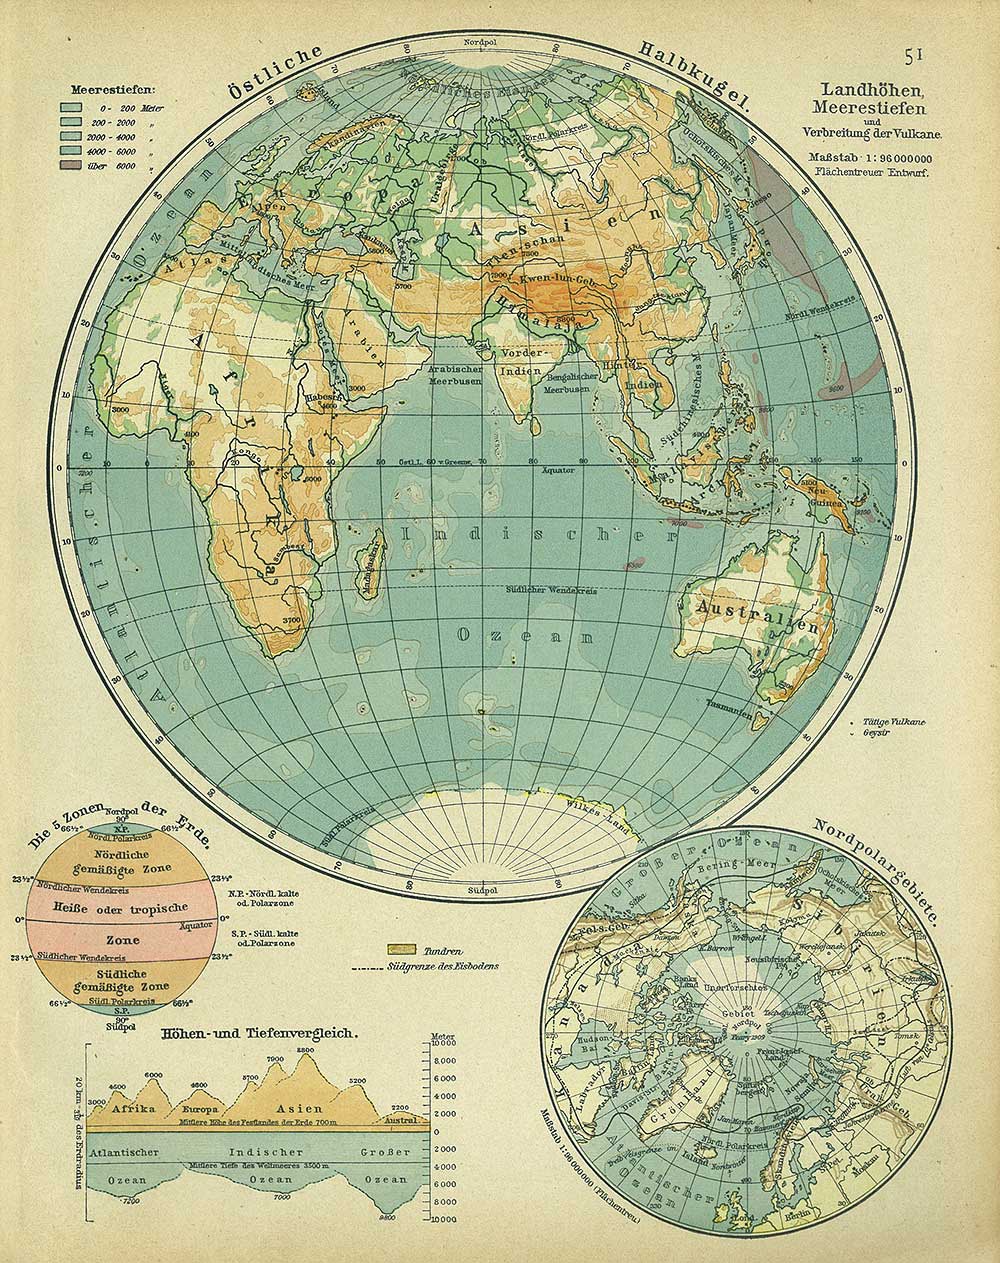 Land heights, ocean depths, for eastern hemisphere, Andrees 'Berliner Schul-Atlas', 1916, page 51, published size to print border 21.38 cm wide by 27.44 cm high.